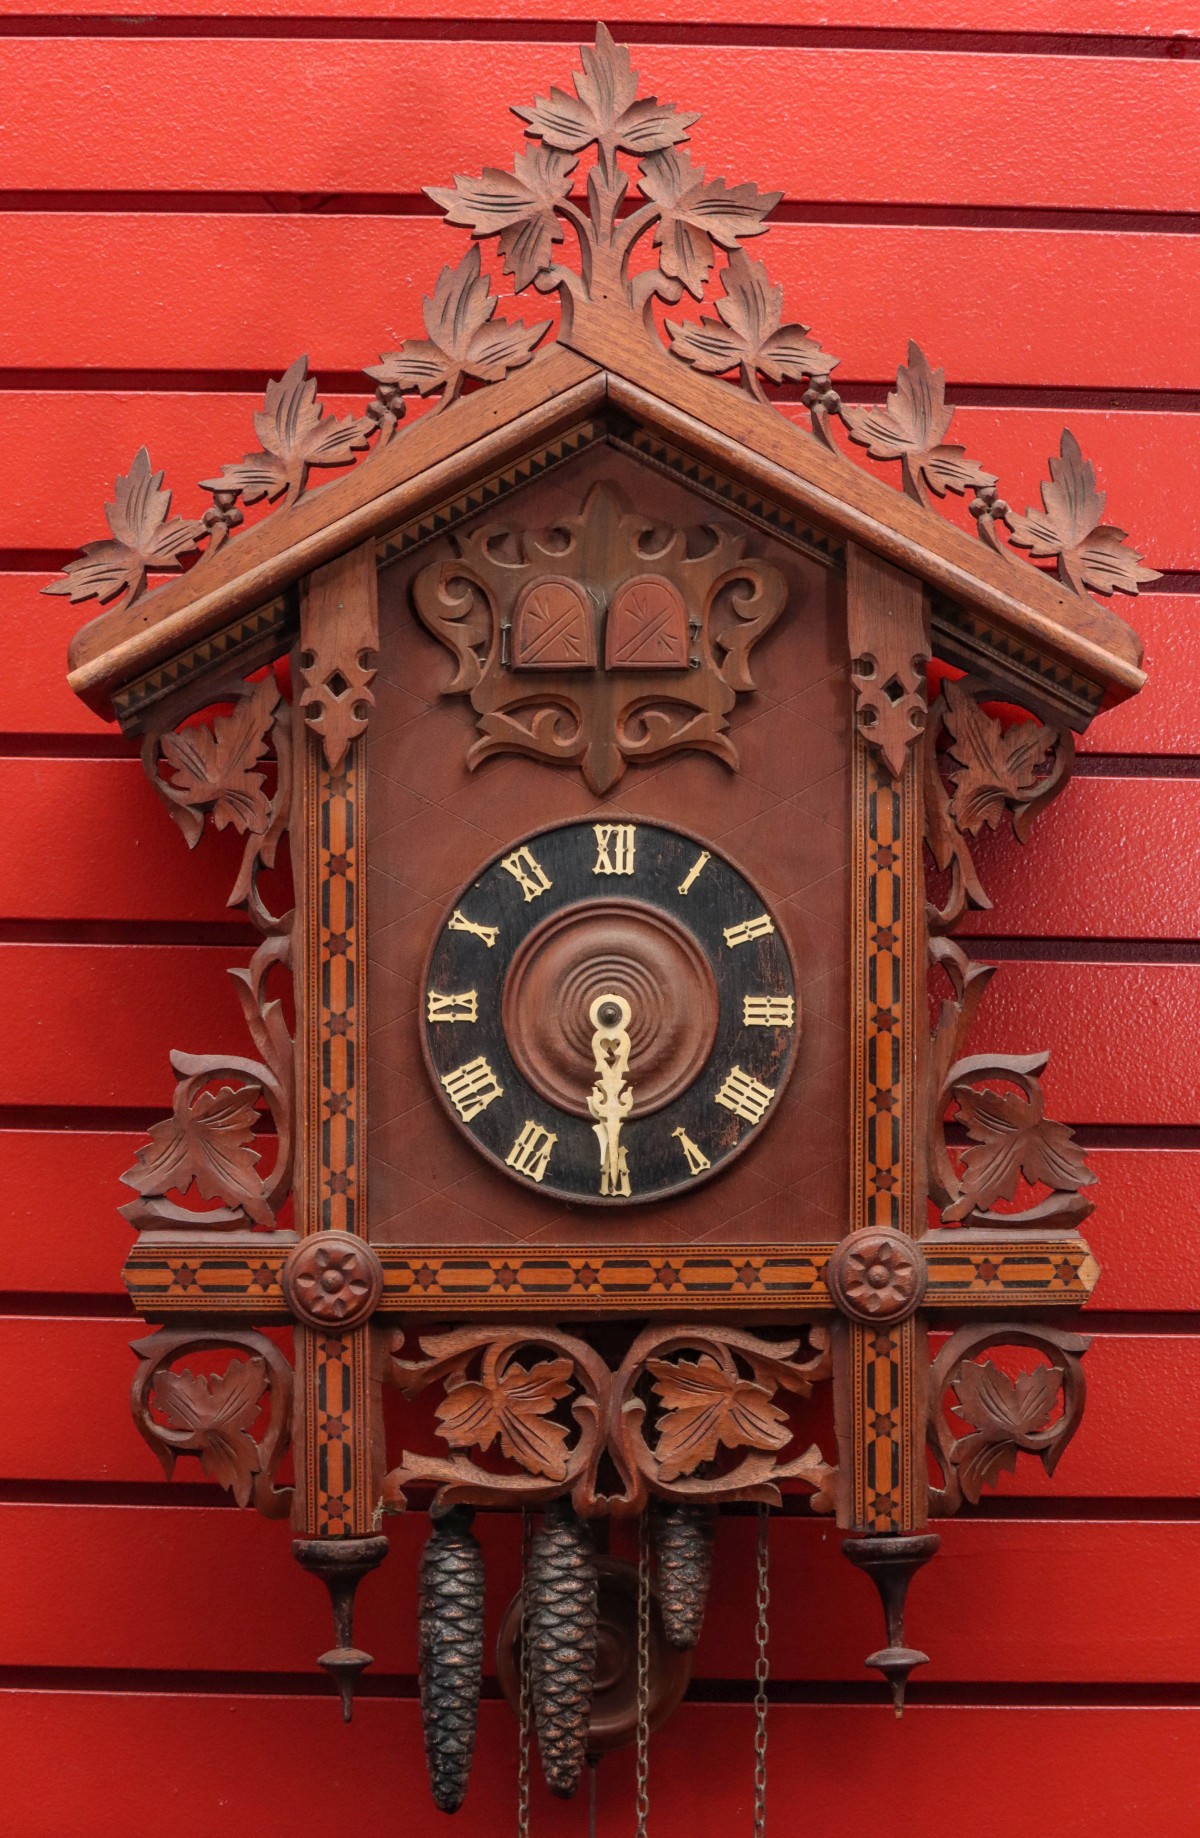 AN EARLY 20TH C. CUCKOO CLOCK WITH CARVING AND INLAY